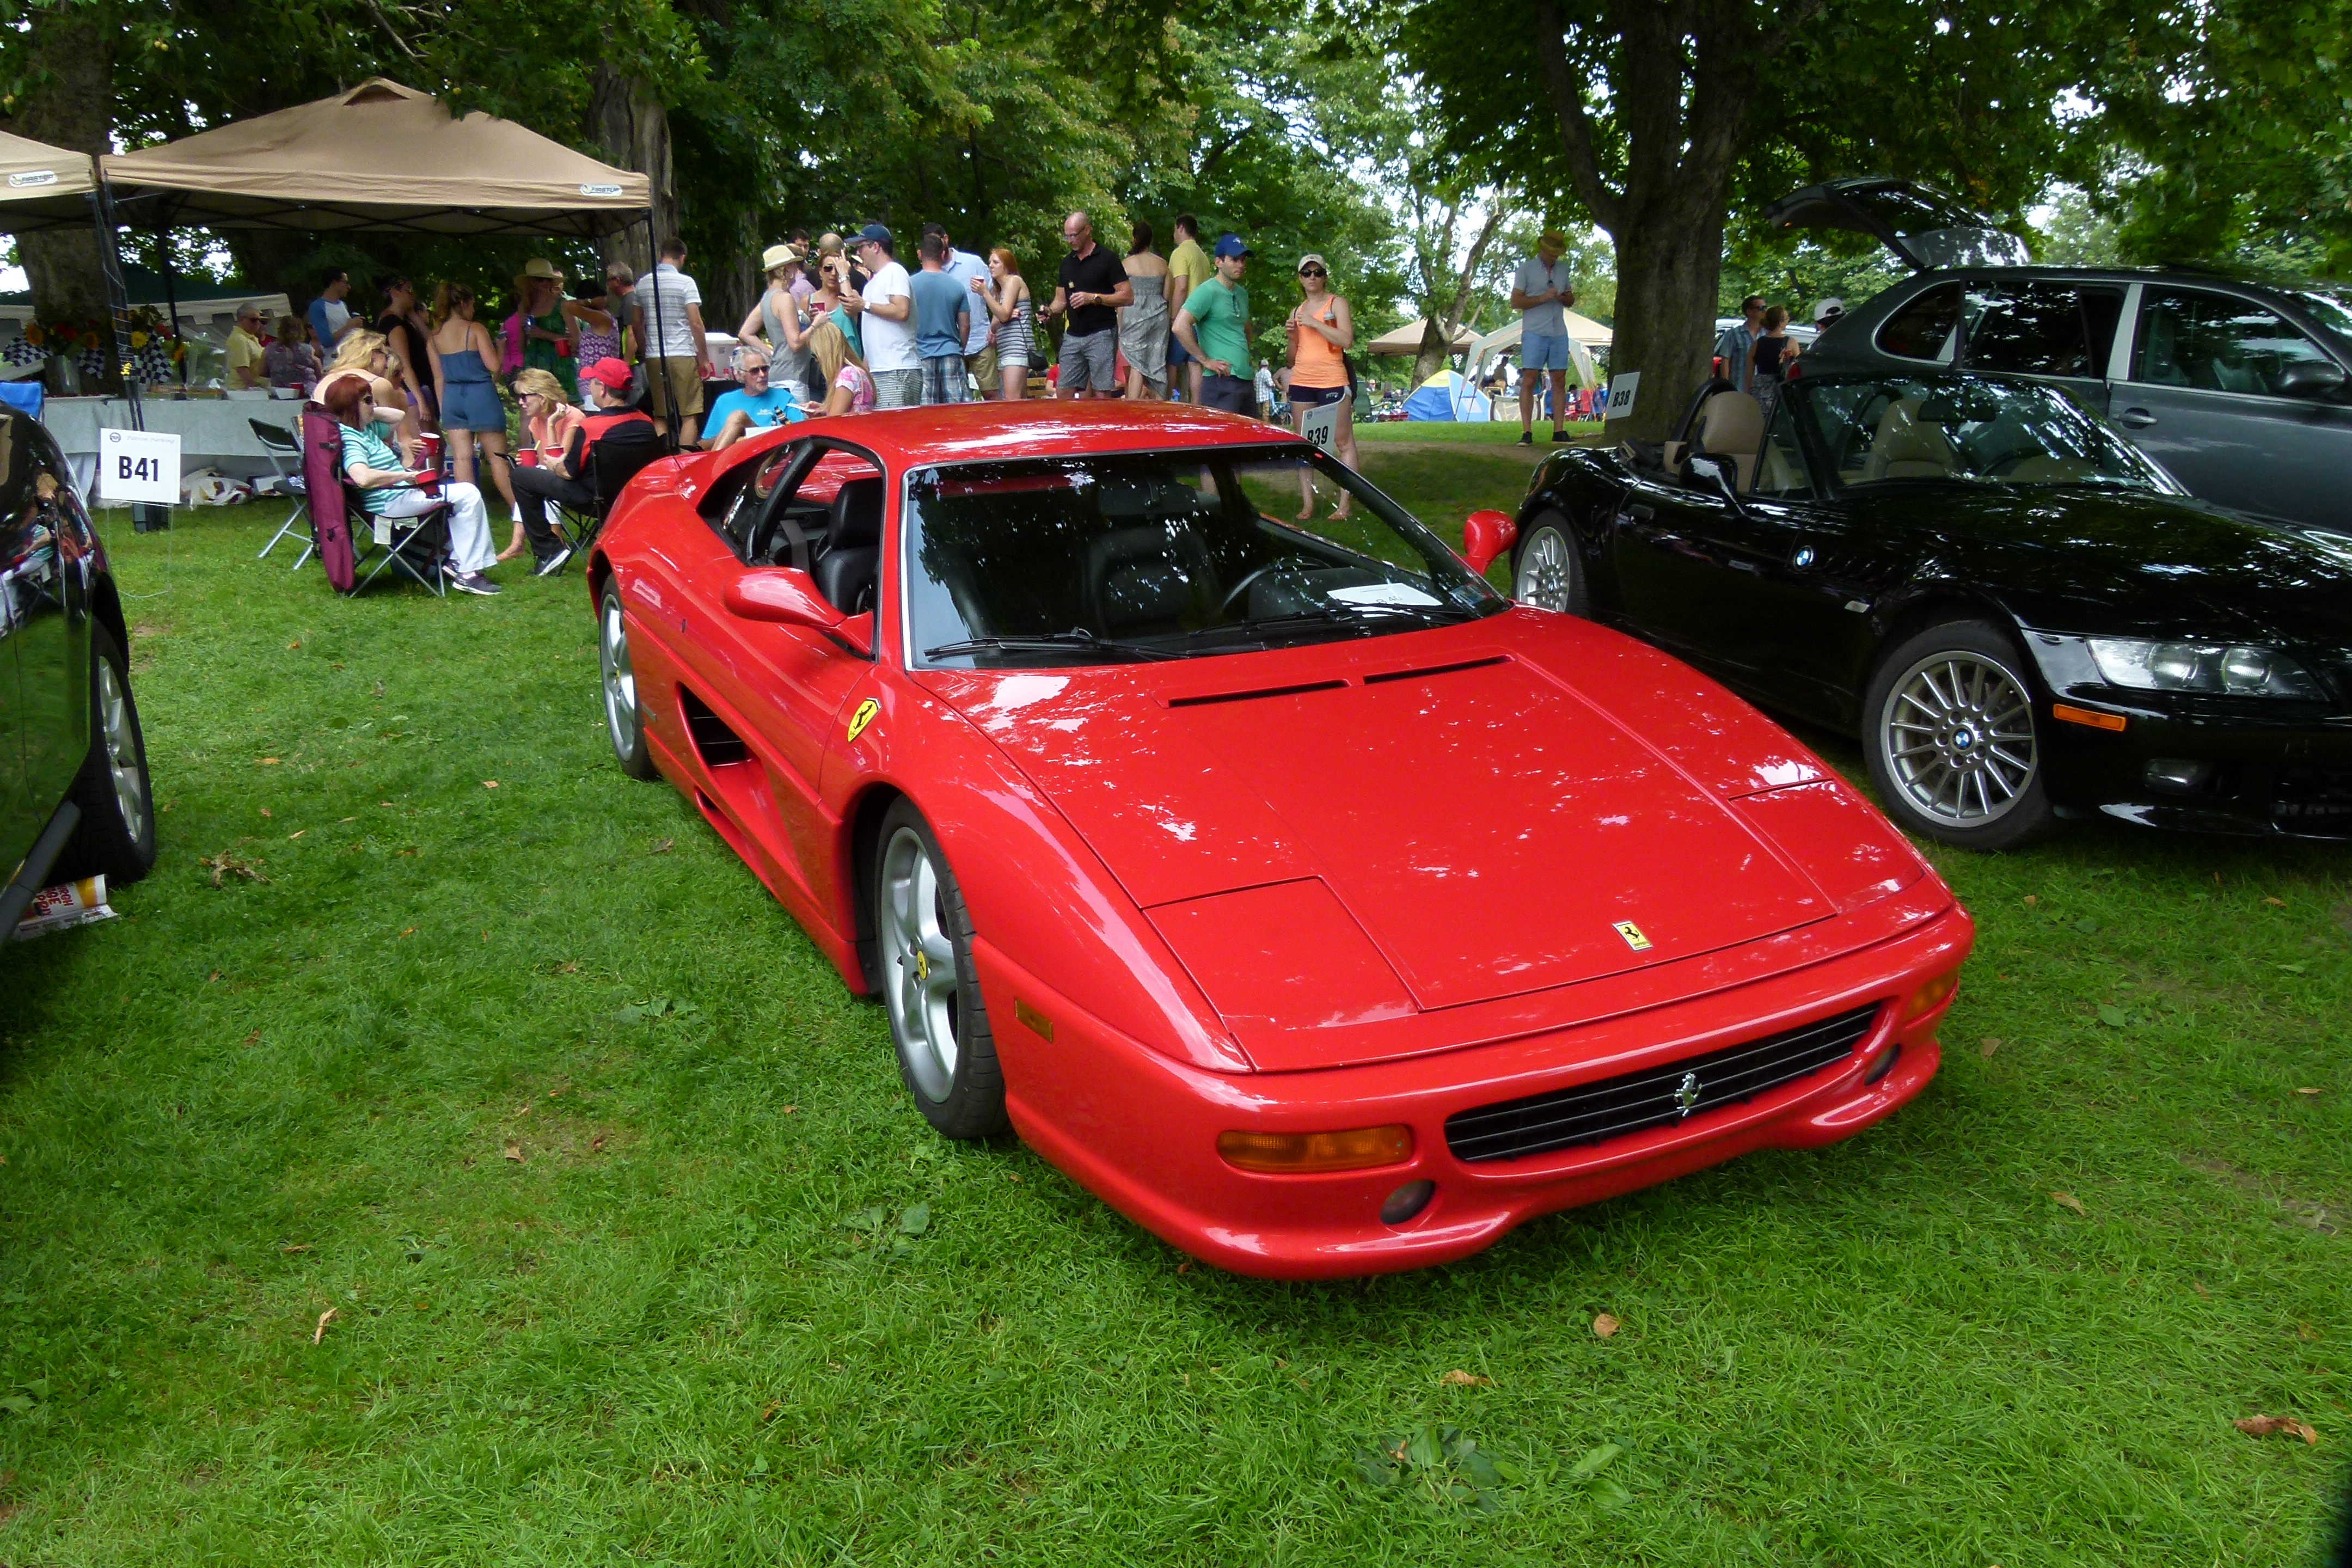 The Marques of Italy was the Pittsburgh Vintage Grand Prix's Marque of the Year 2015. Ferrari pictured.